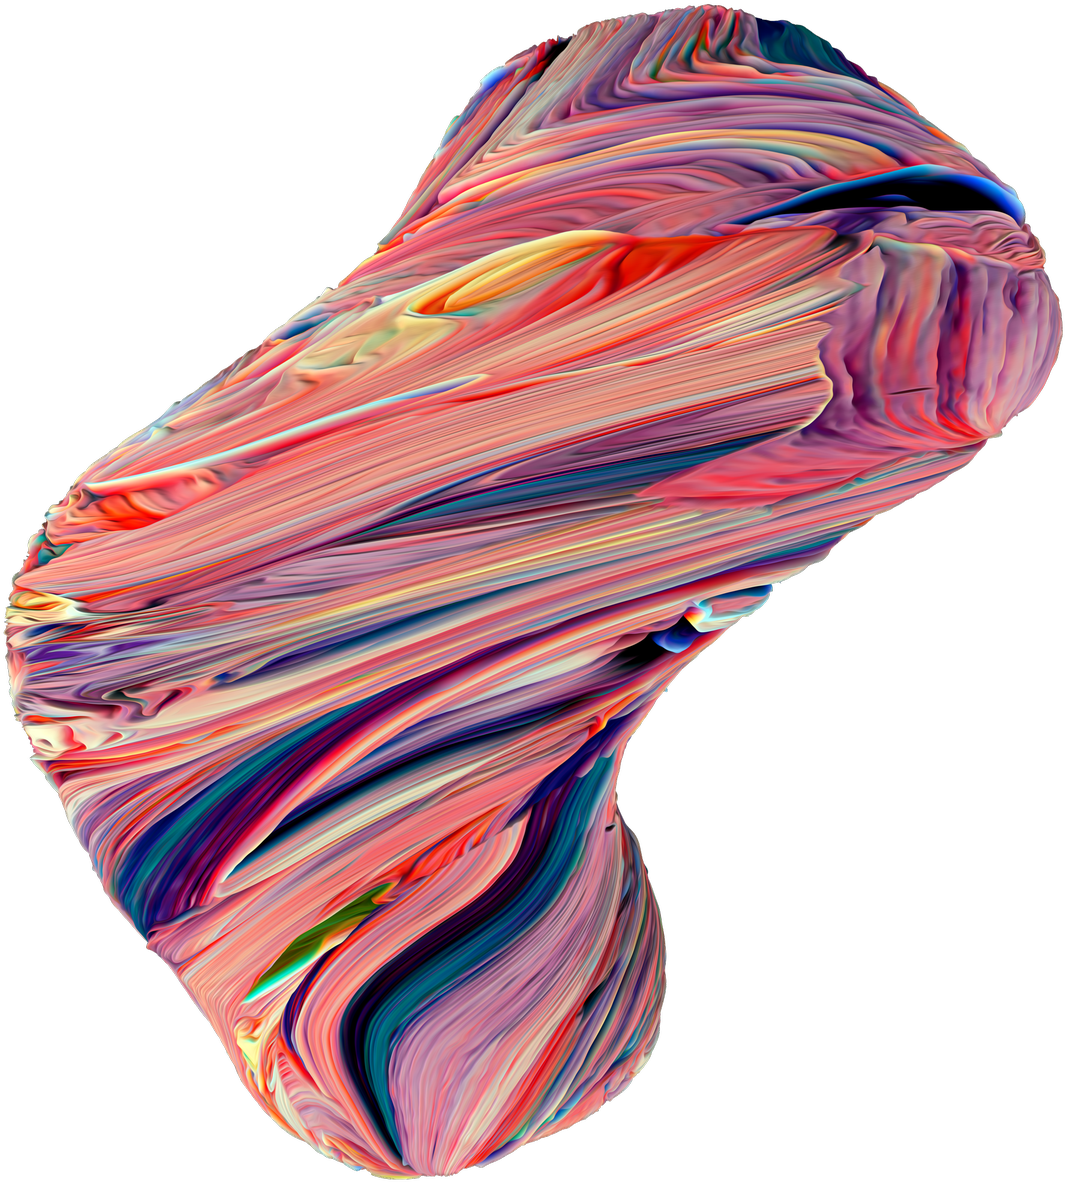 A Colorful Swirly Object On A Black Background PNG